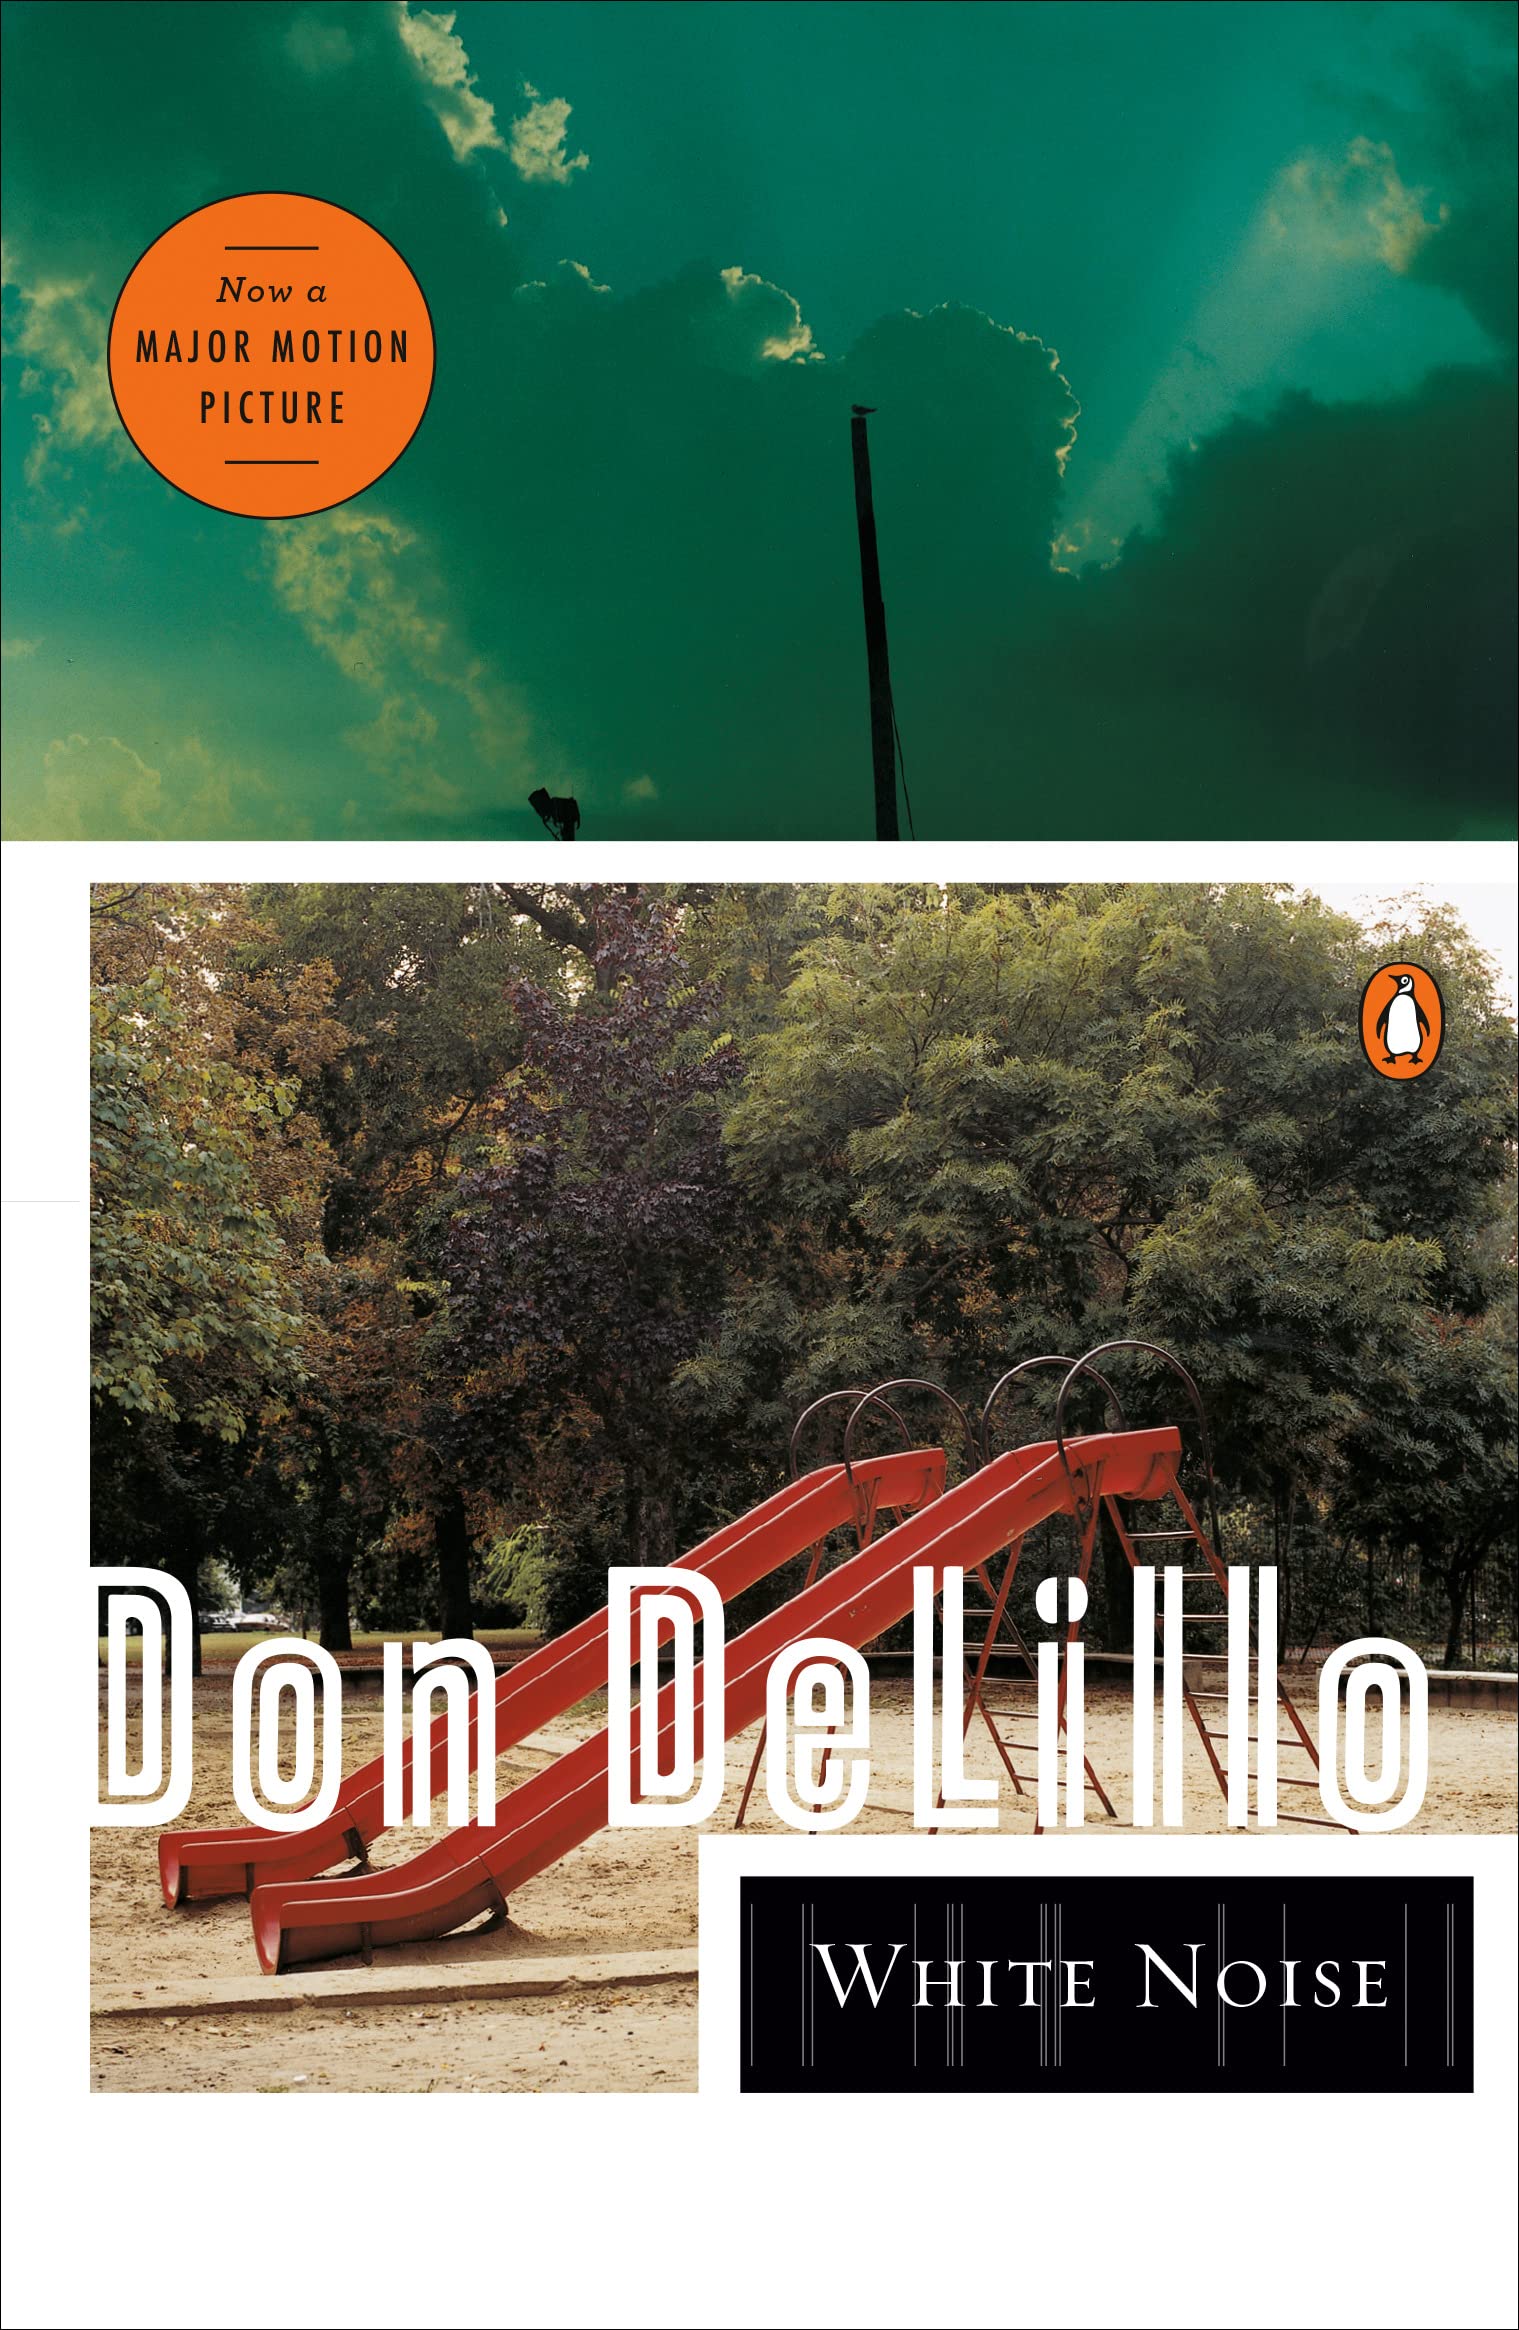 White Noise by Don DeLillo $1.99 on Kindle